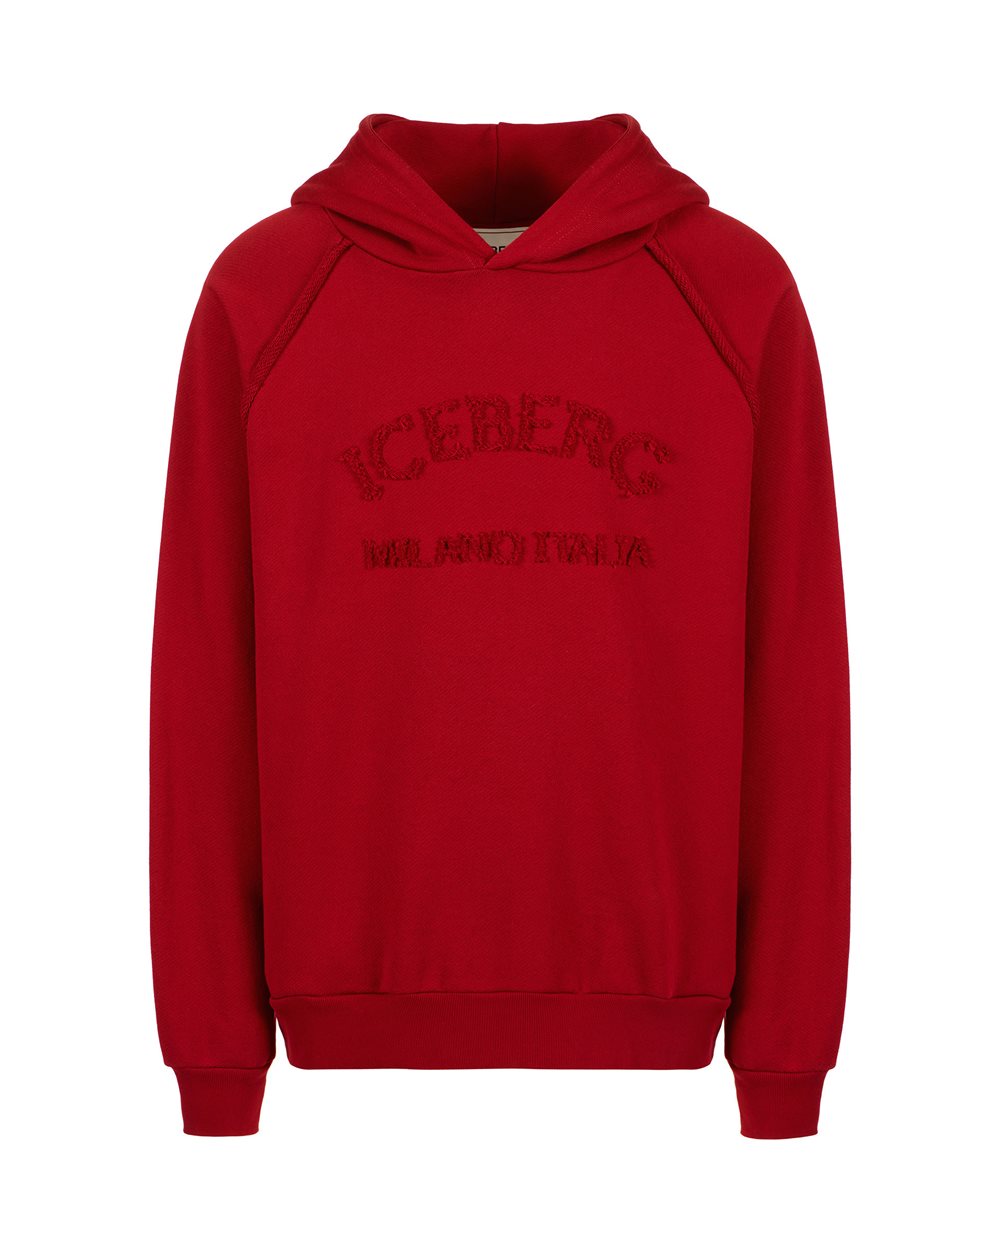 Sweatshirt with hood and logo - PREVIEW | Iceberg - Official Website